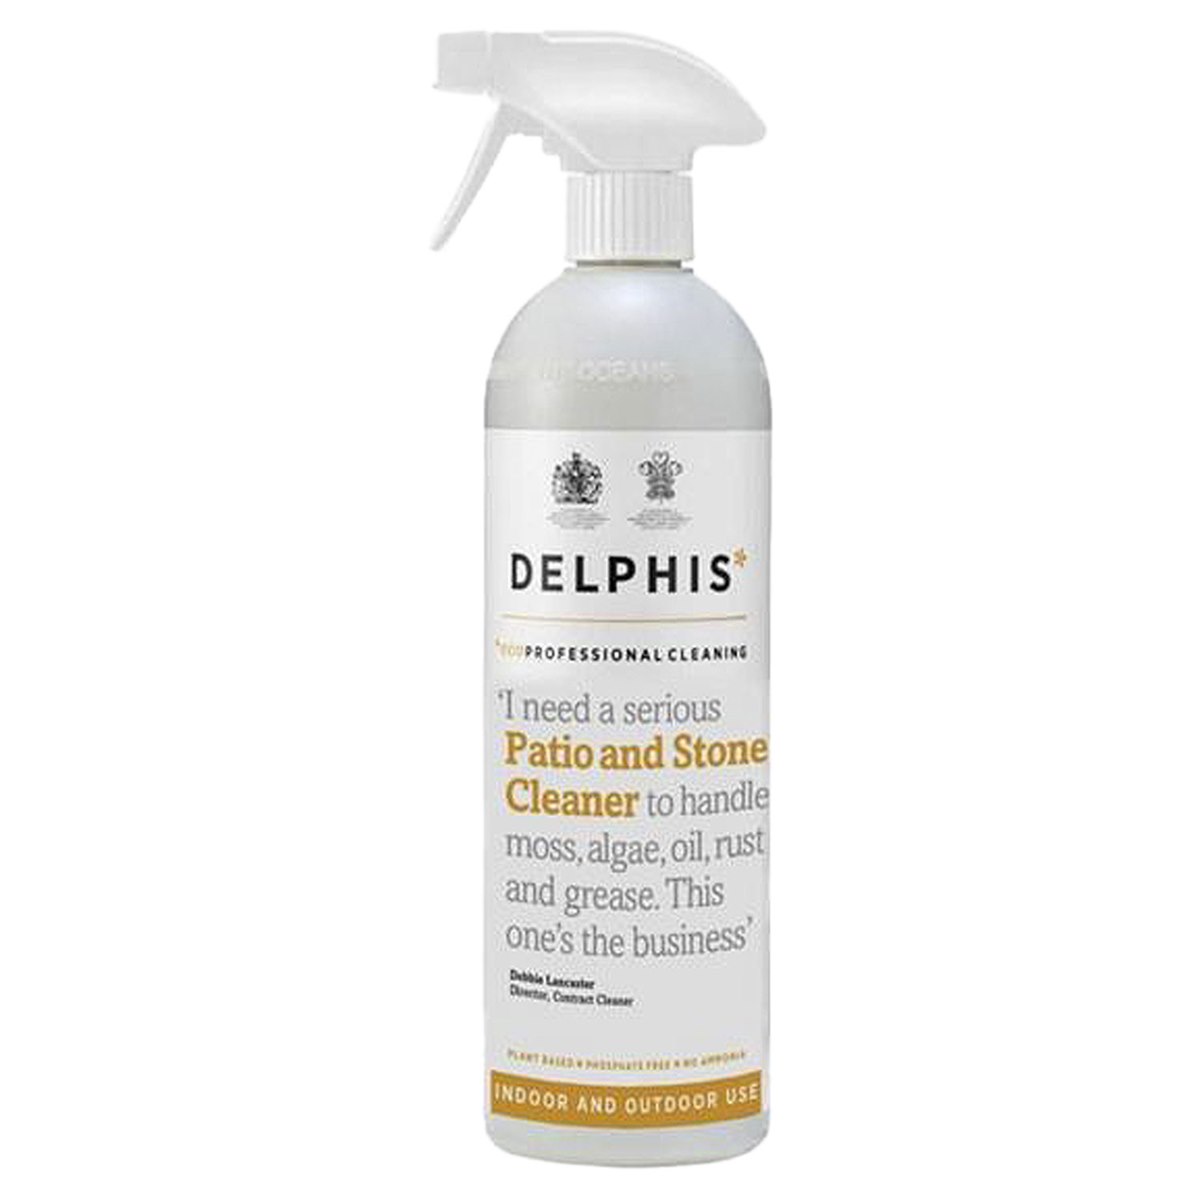 Delphis Eco Professional Cleaning Patio and Stone Cleaner Spray